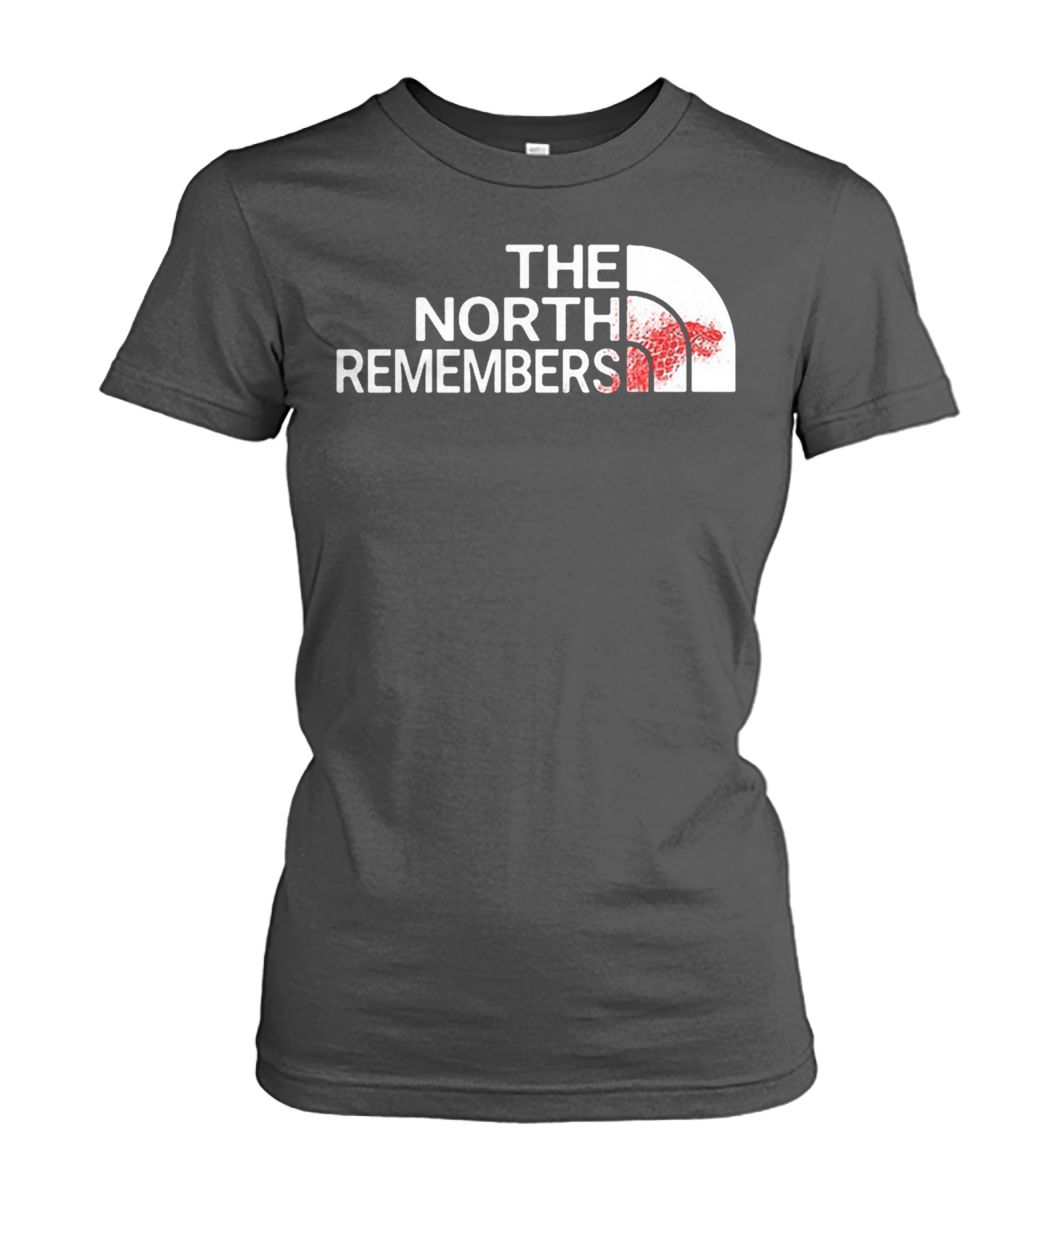 The north remembers women's crew tee